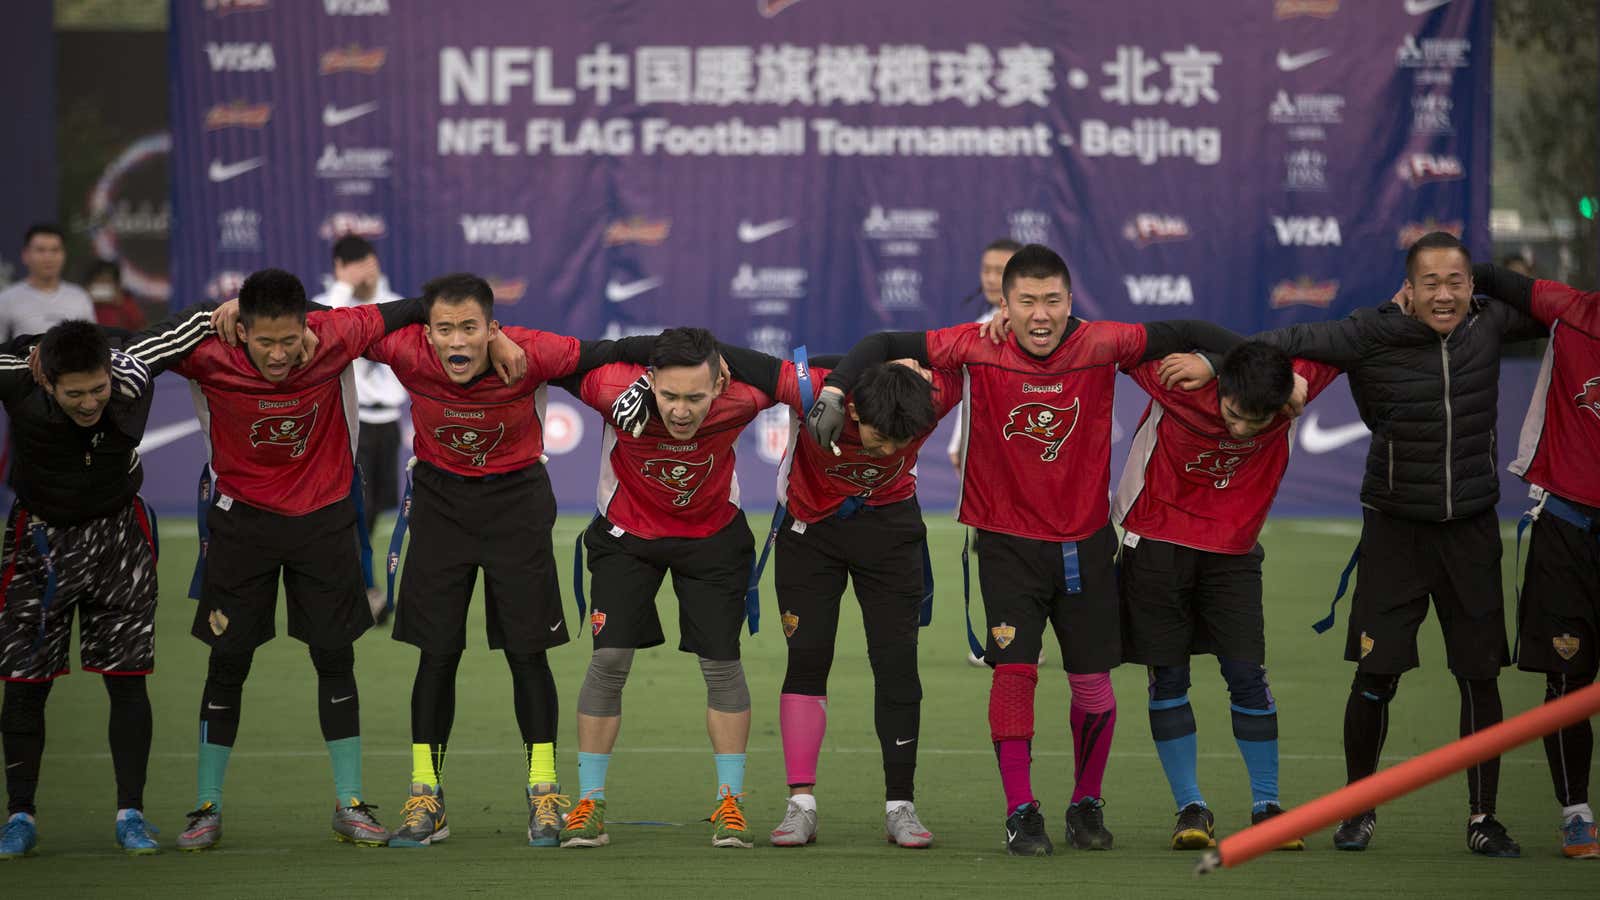 The NFL has been flirting with China for over a decade.